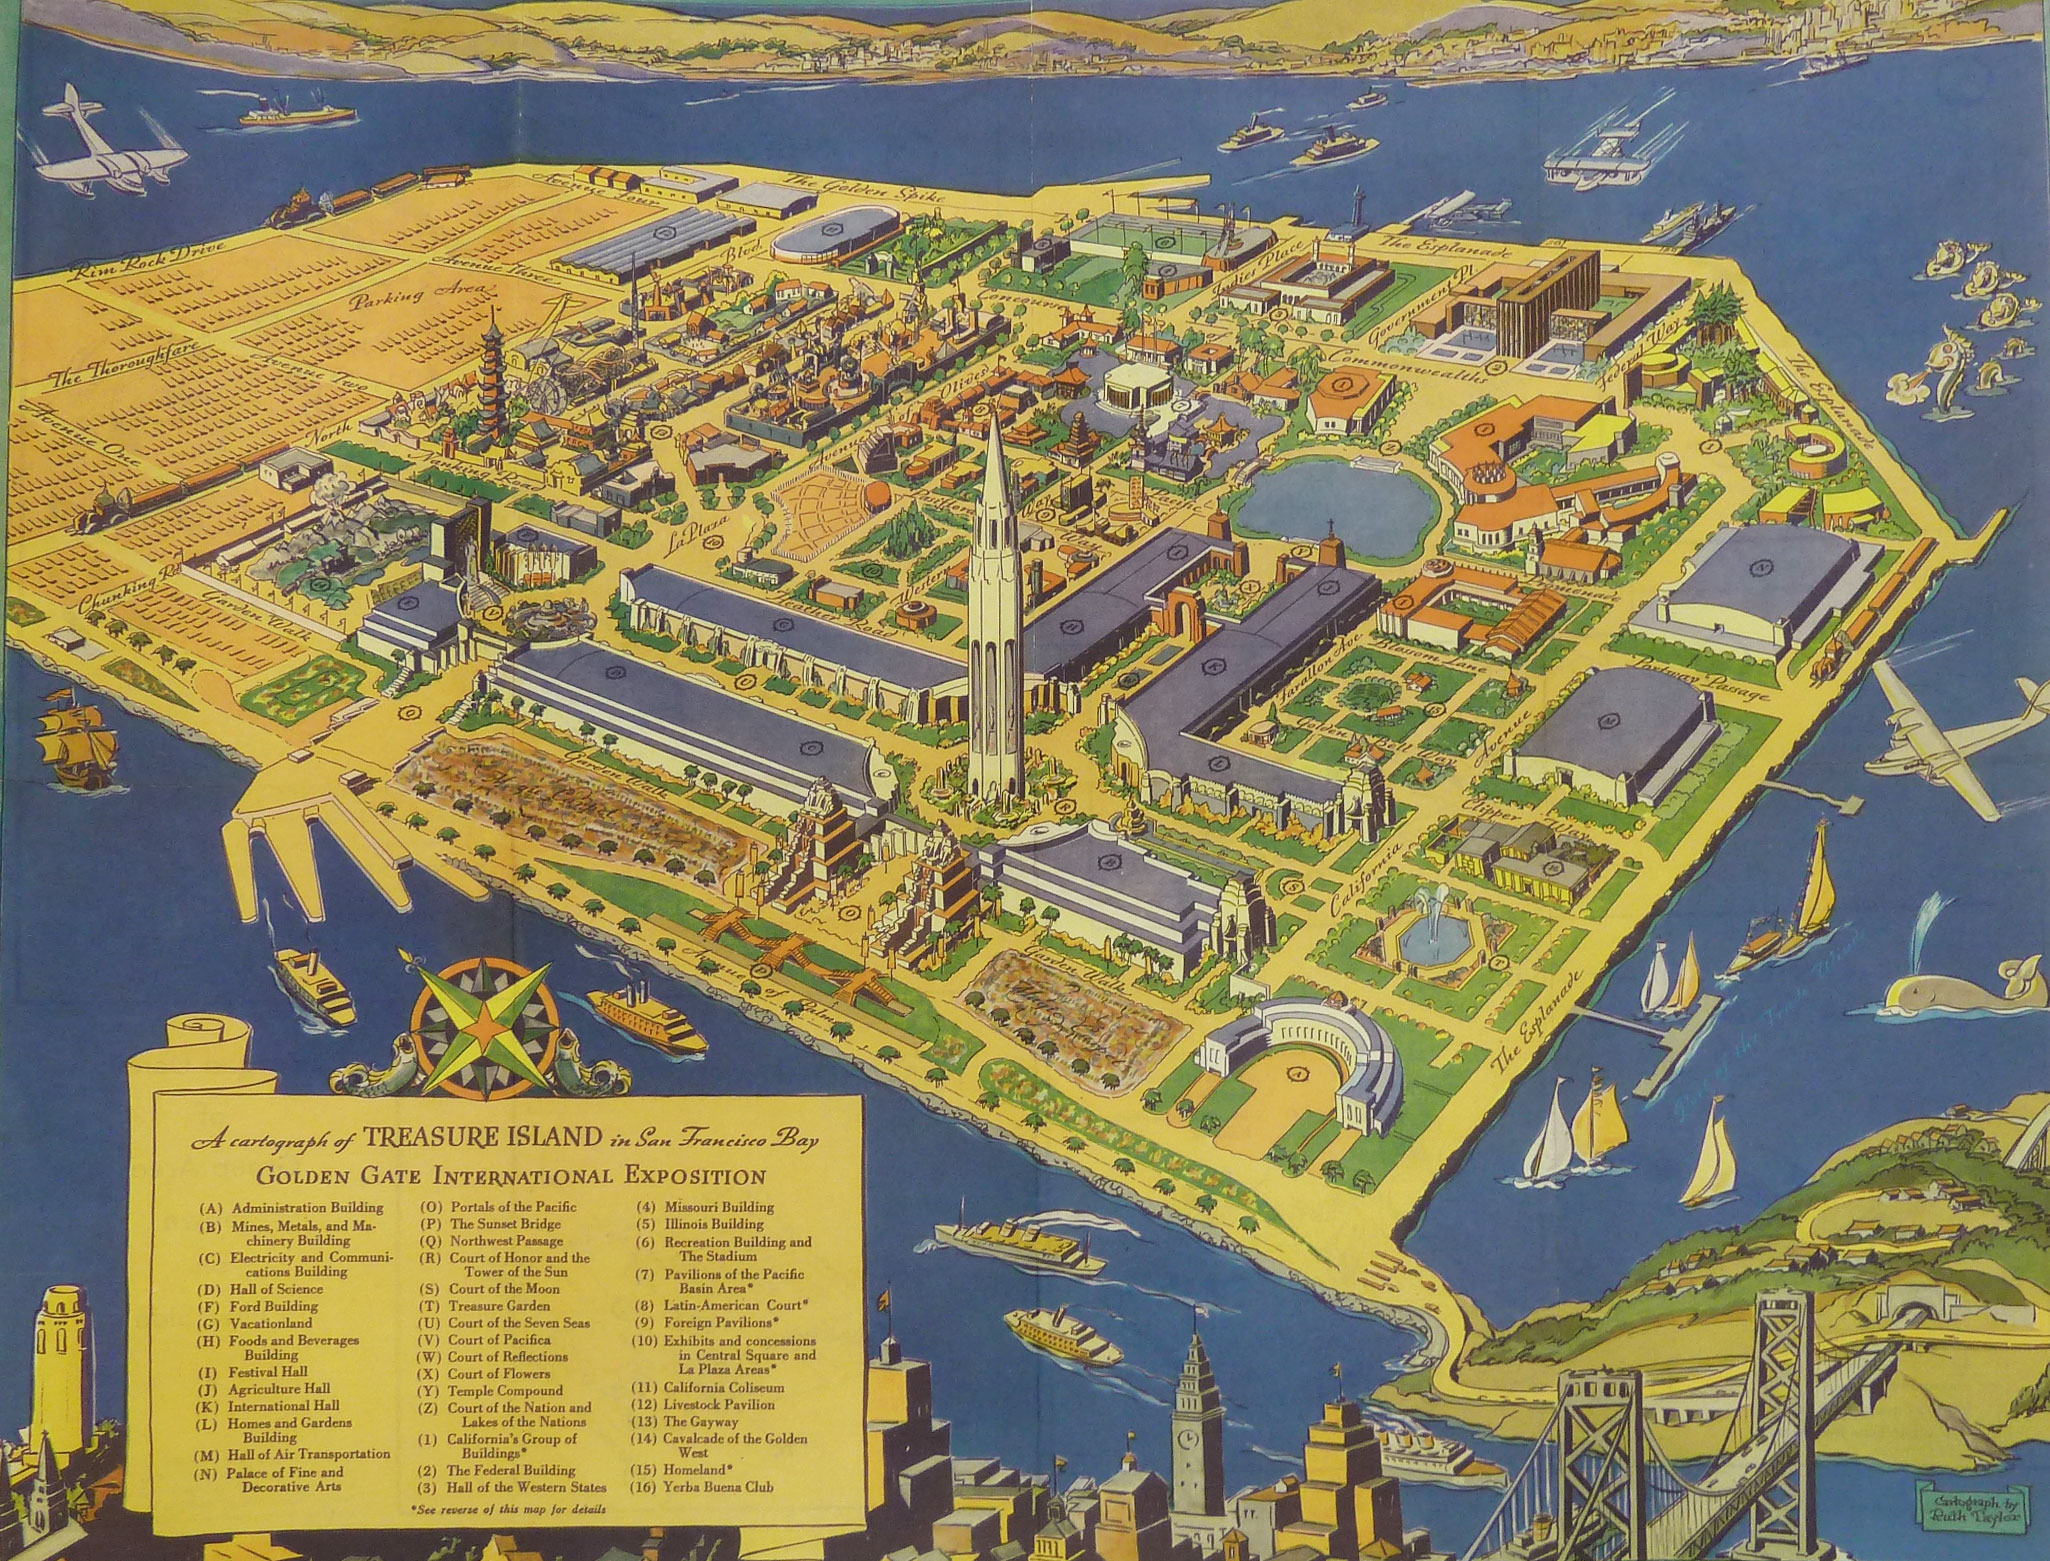 A poster depicting a map of Treasure Island, located in the San Francisco Bay. The poster is blue, yellow, green, and orange. On the island are plots of land each holding pavilions. In the water surrounding the island are sea creatures, sailboats and ferries. In the bottom right corner is a key of the map listing the pavilion themes for the Golden Gate International Exposition.